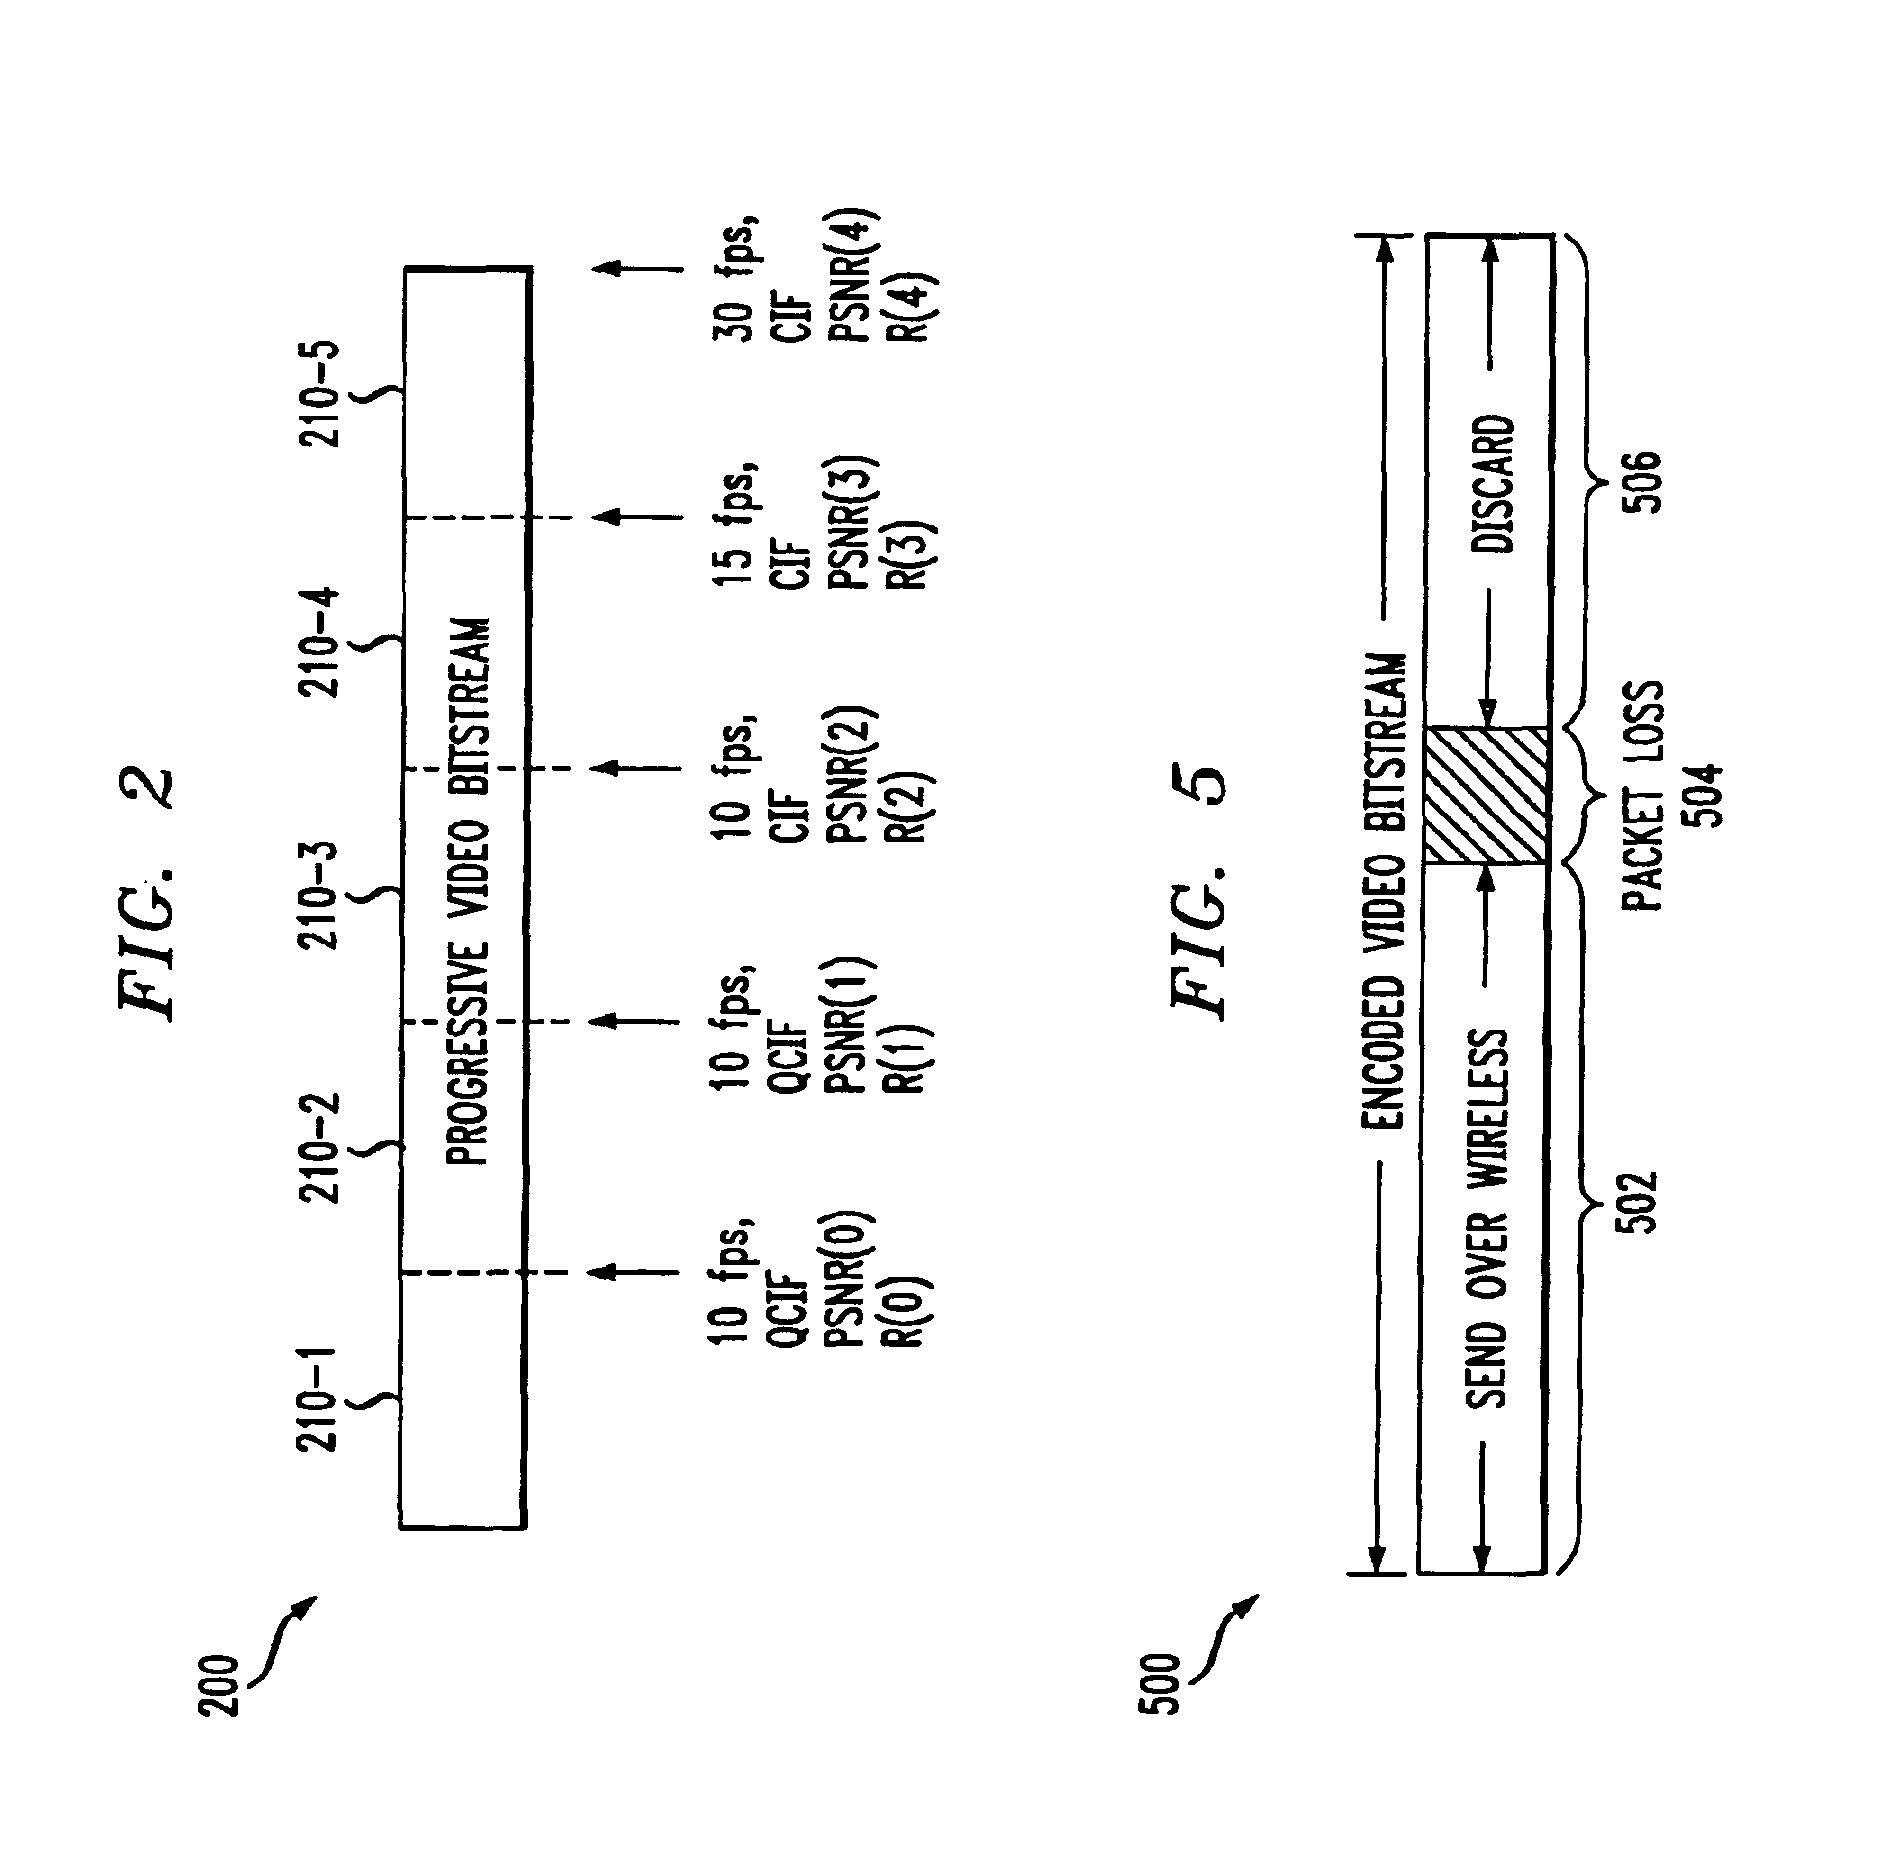 Method and apparatus for video transmission over a heterogeneous network using progressive video coding